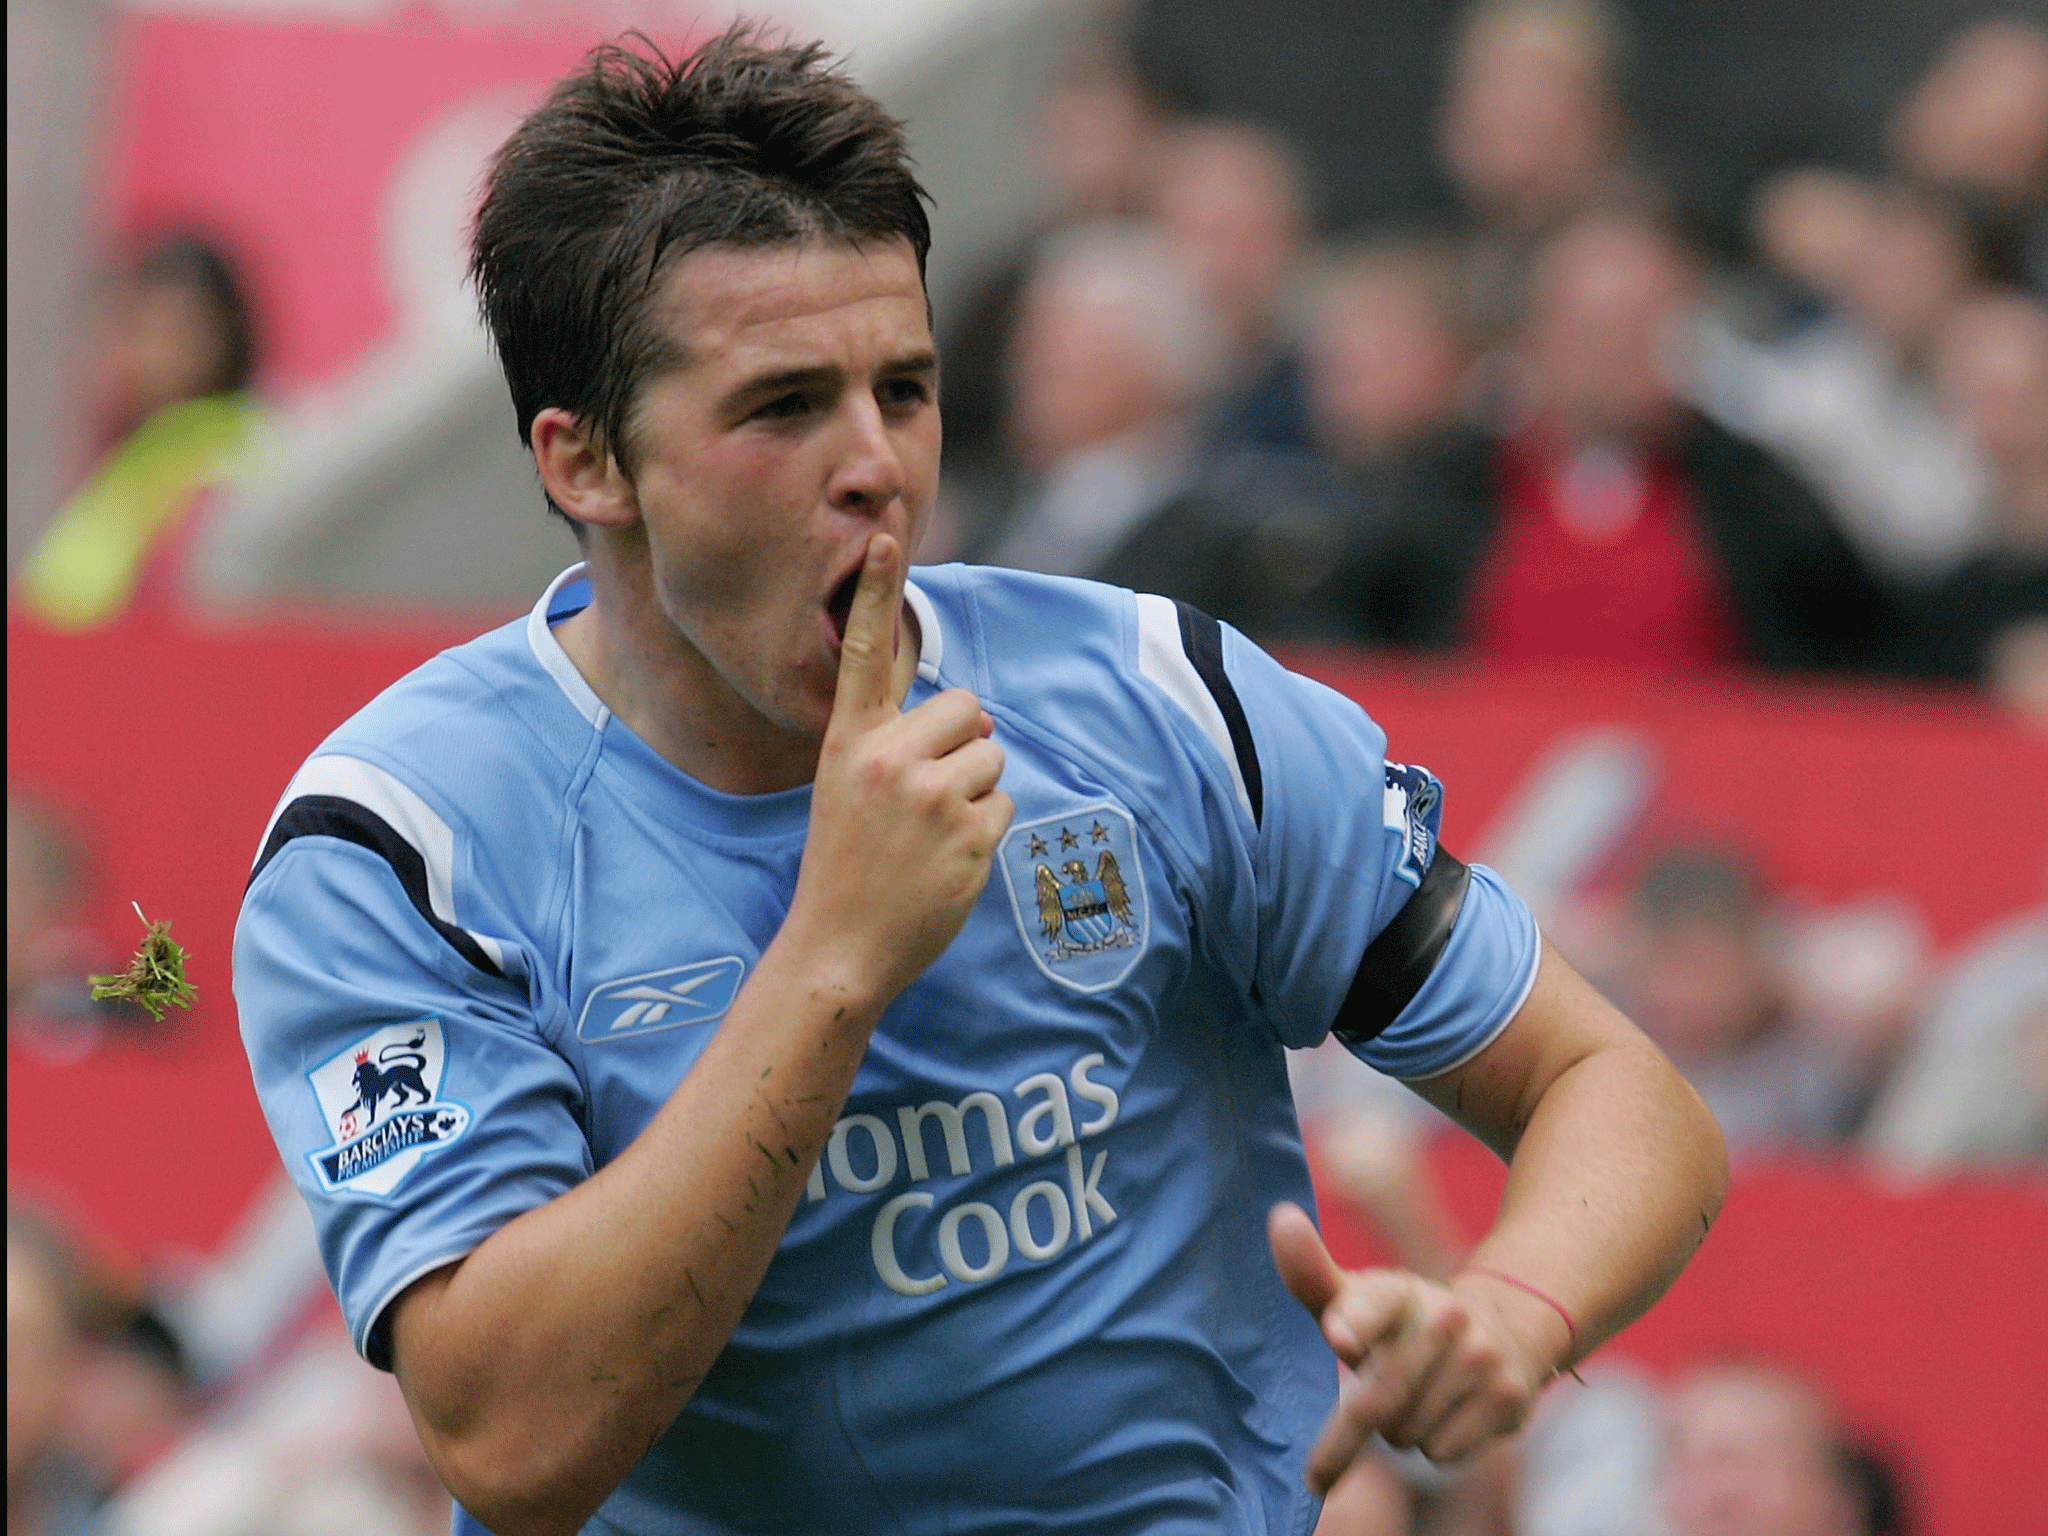 Joey Barton was fined £60,000 after stubbing out a cigar in a youth player's eye